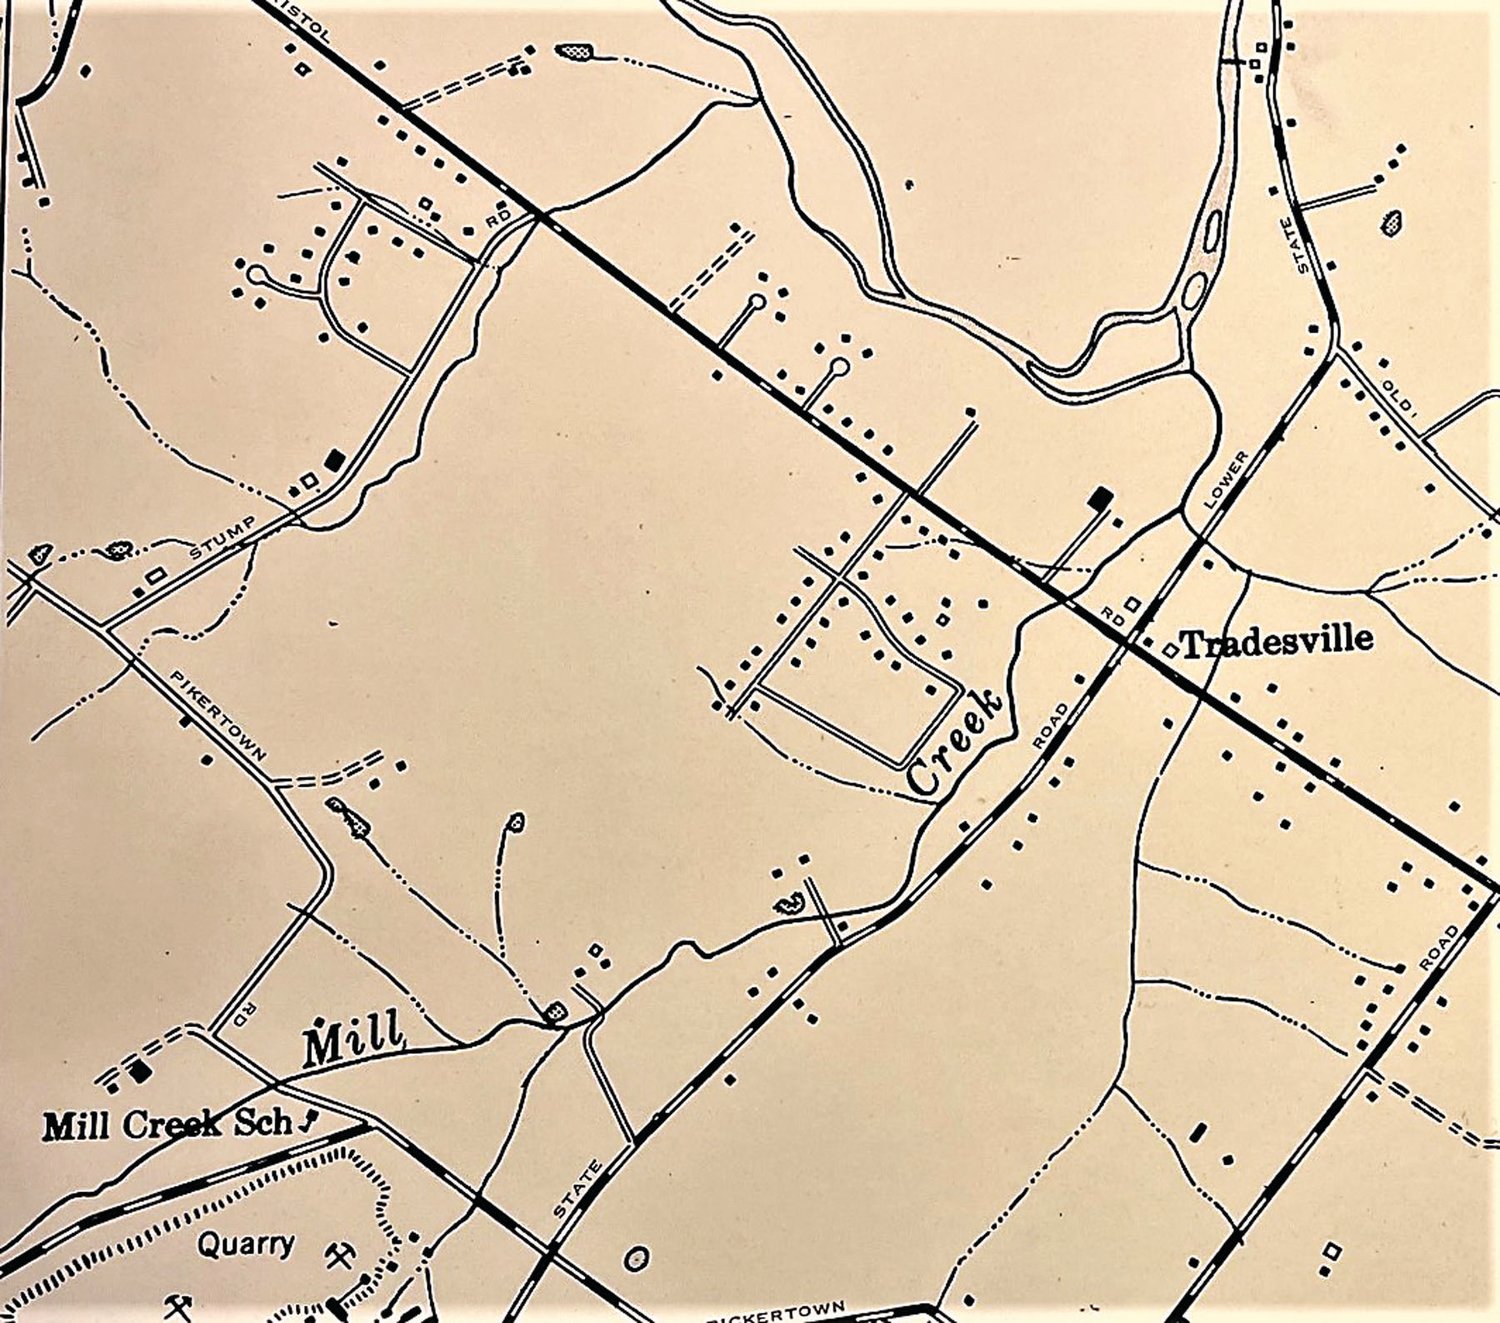 The village of Tradesville grew up at the intersection of Bristol and Lower State roads, between Castle Valley and Eureka, on the Doylestown-Warrington Township line.